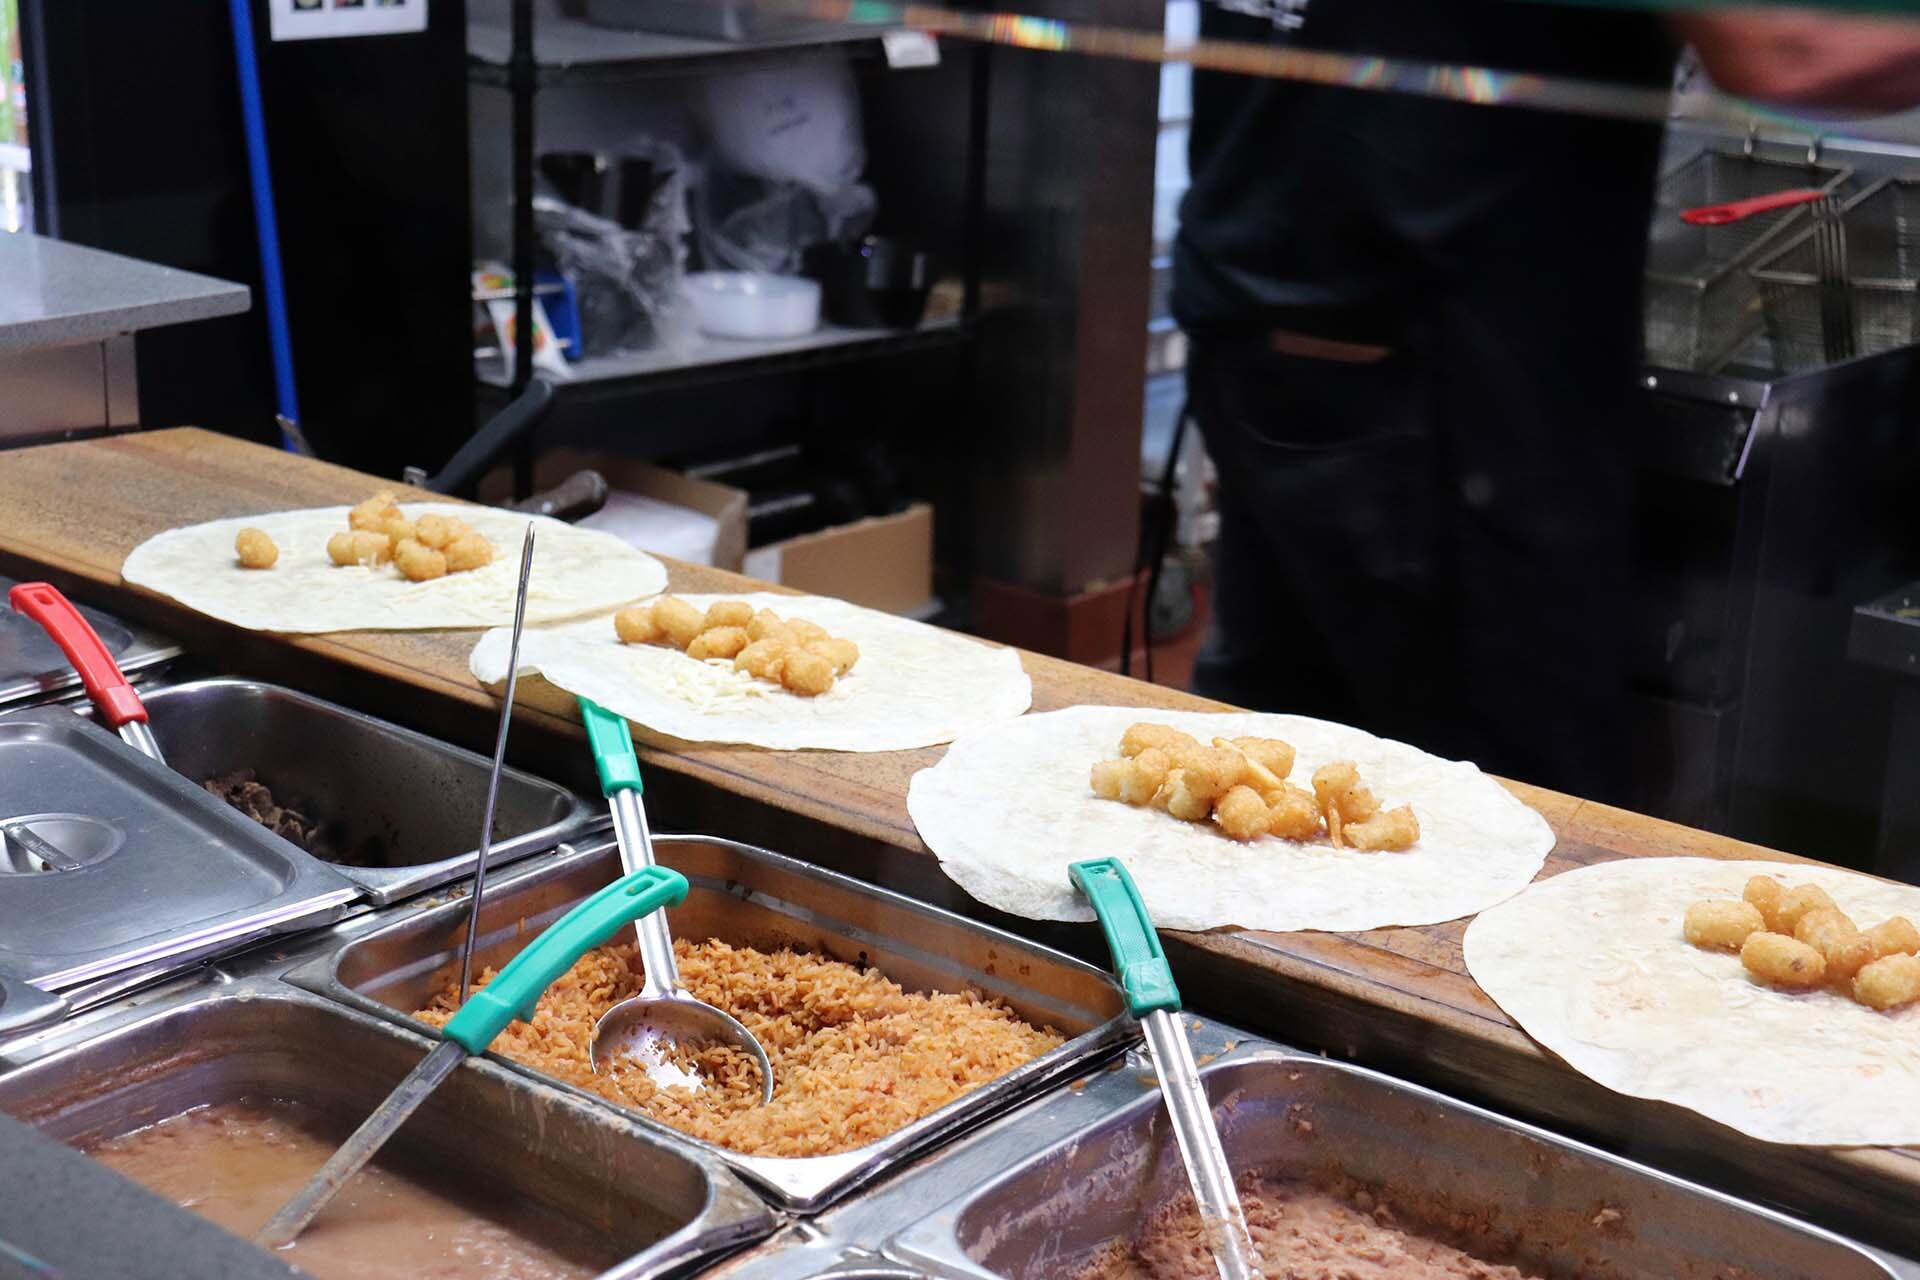 inside a taqueria's kitchen, four burritos are being prepared with tater tots as a prominent ingredient